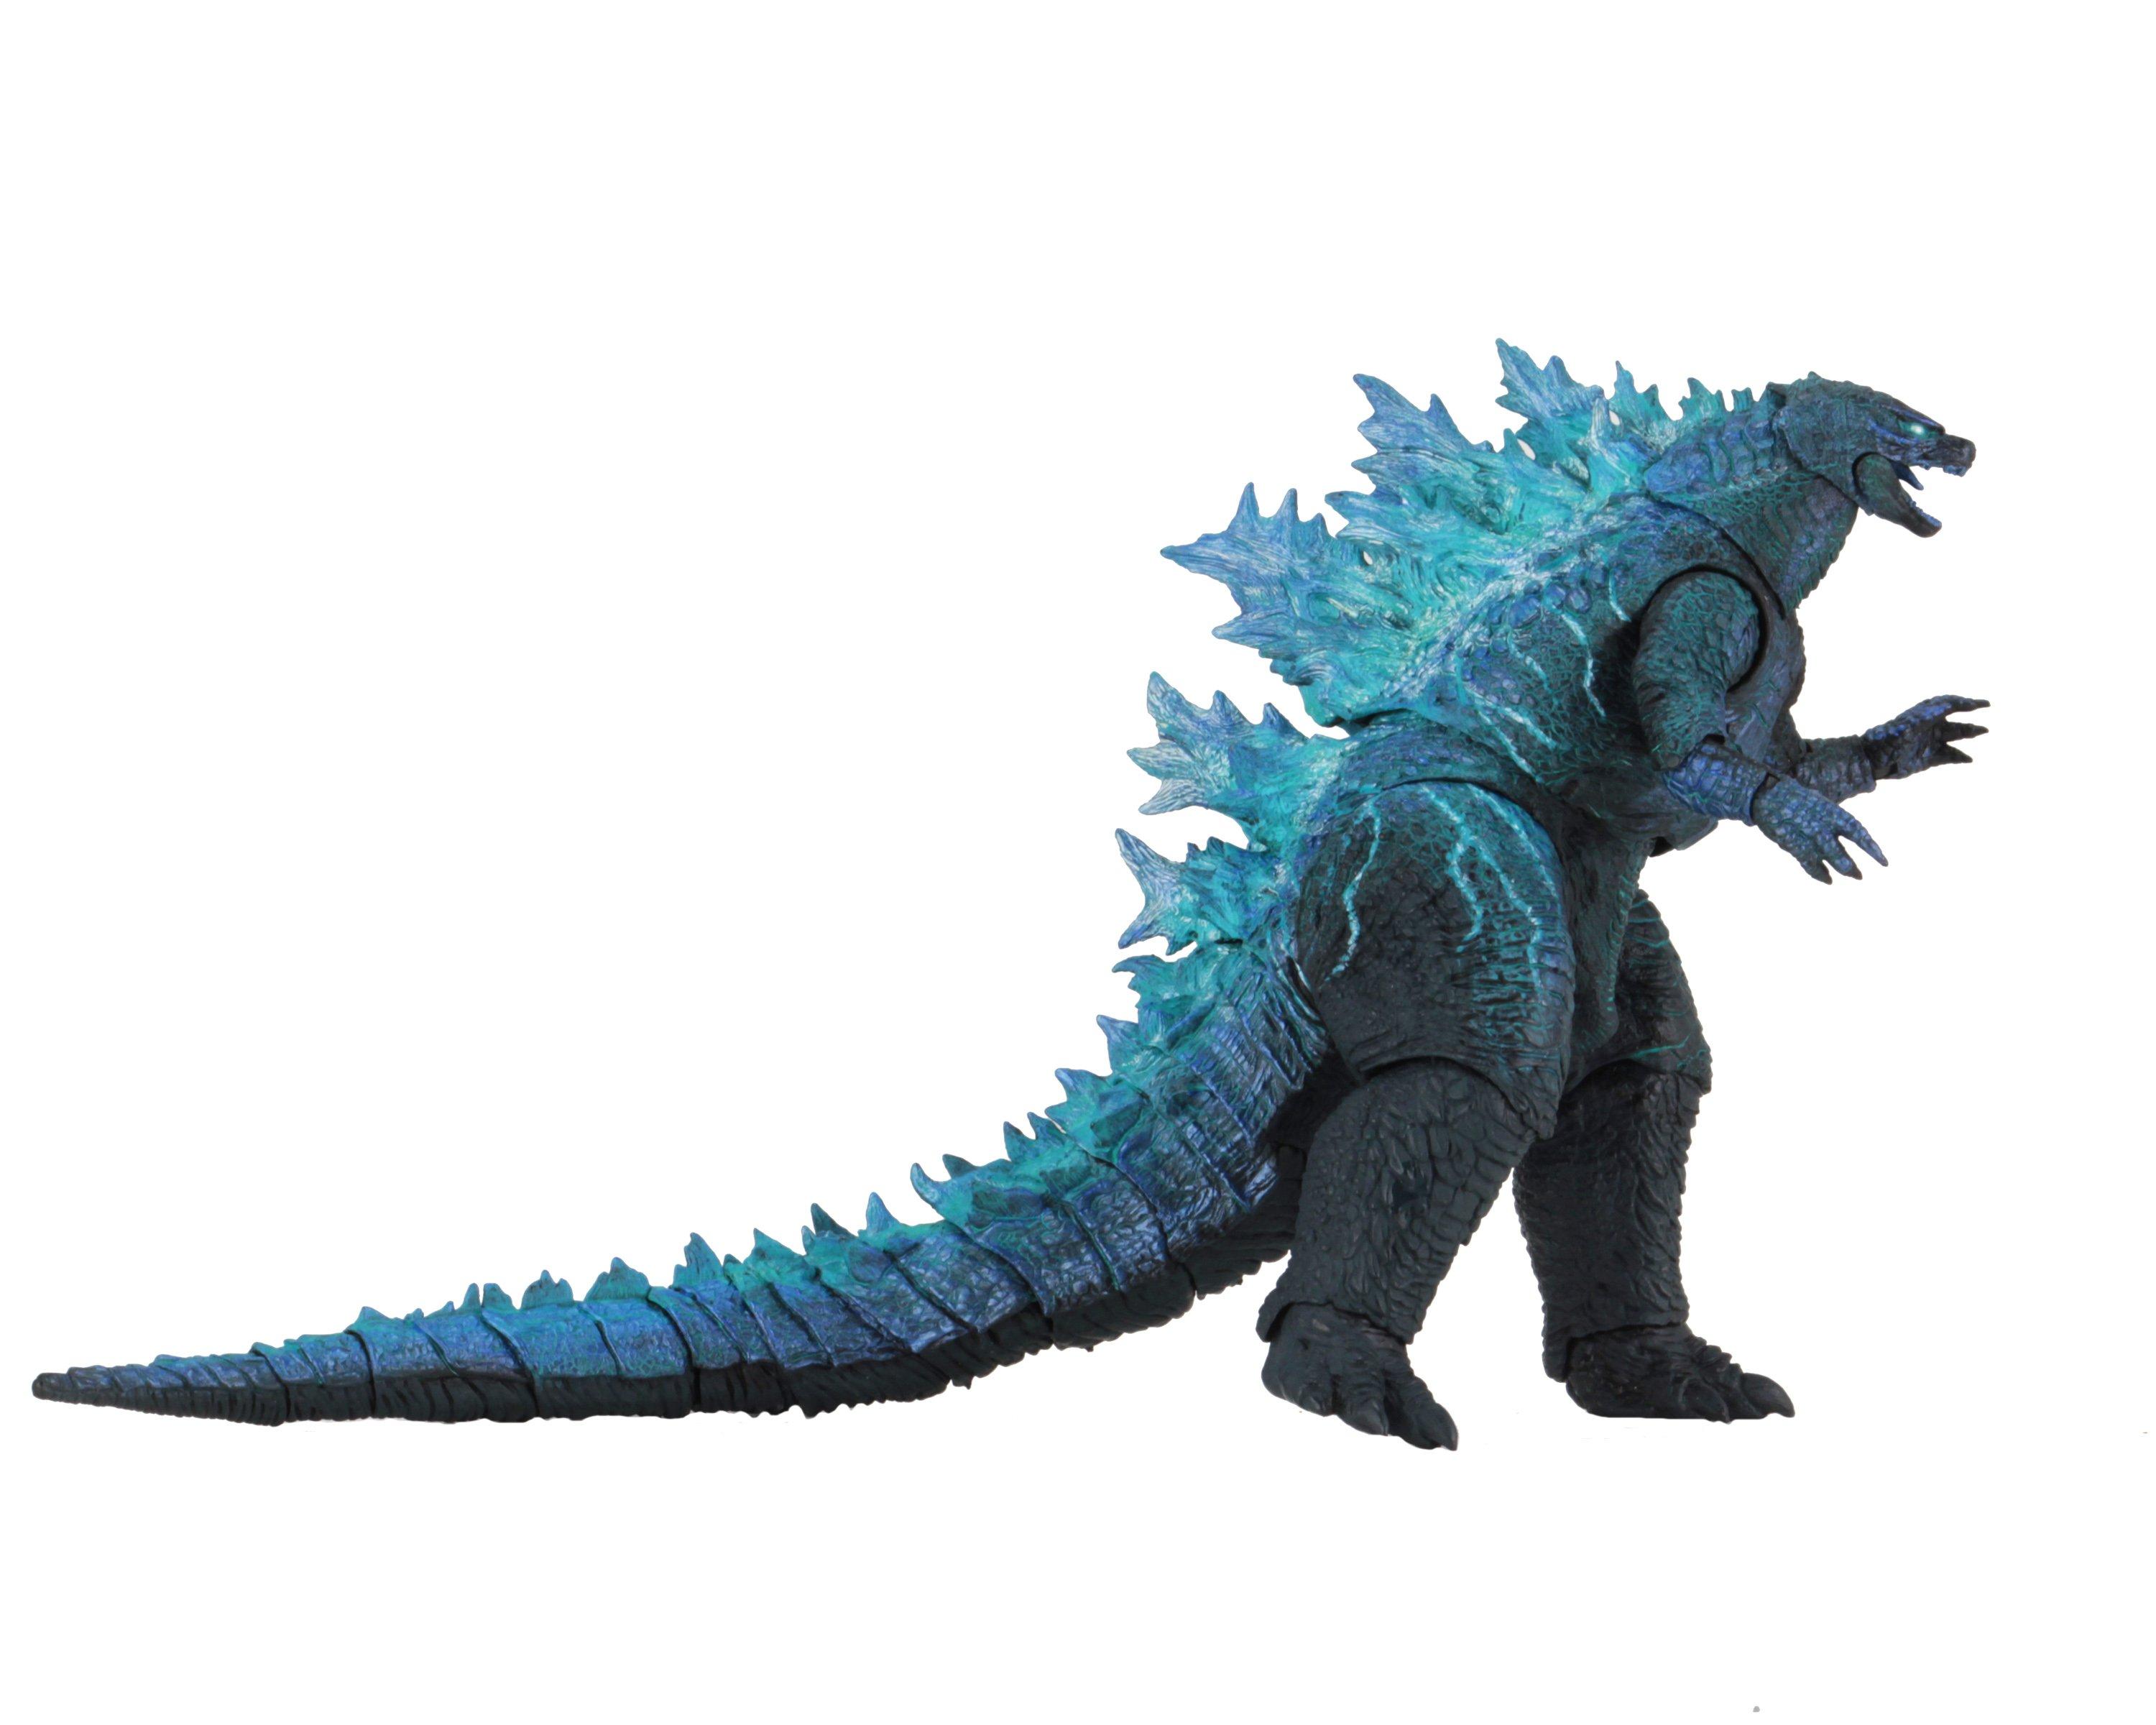 stores that sell godzilla toys near me